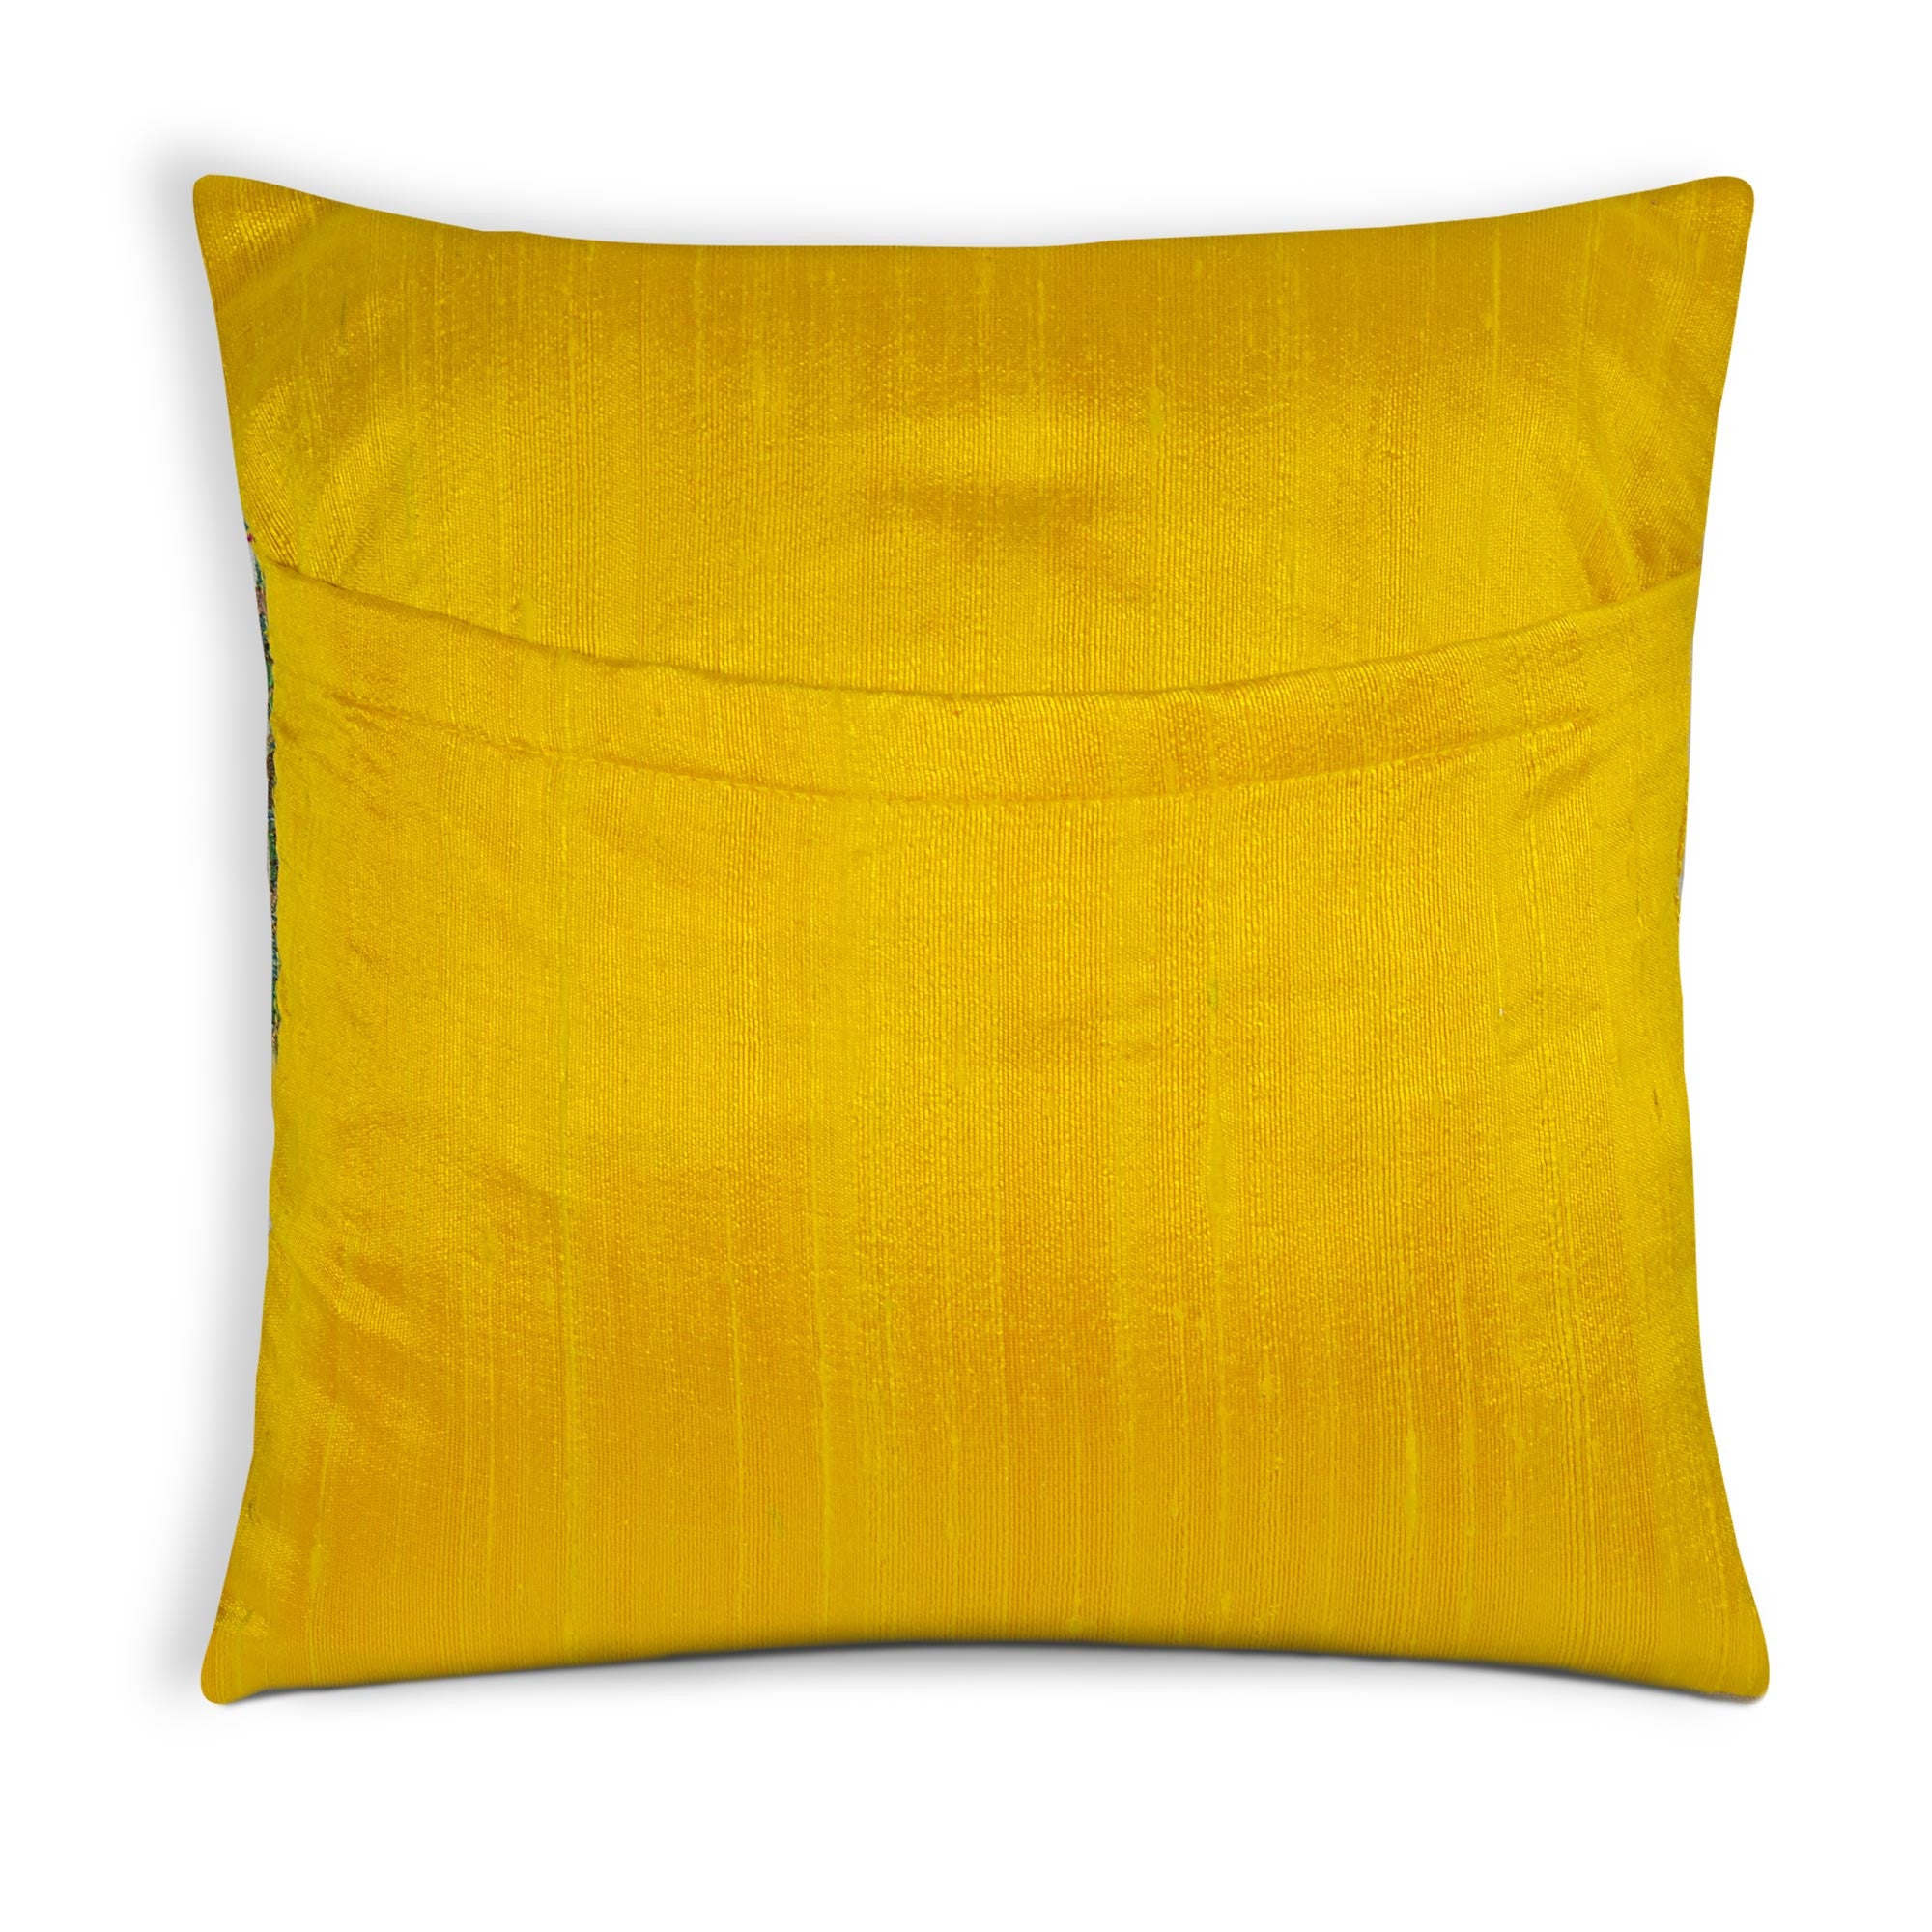 Envelope style kashmir embroidery raw silk cushion cover